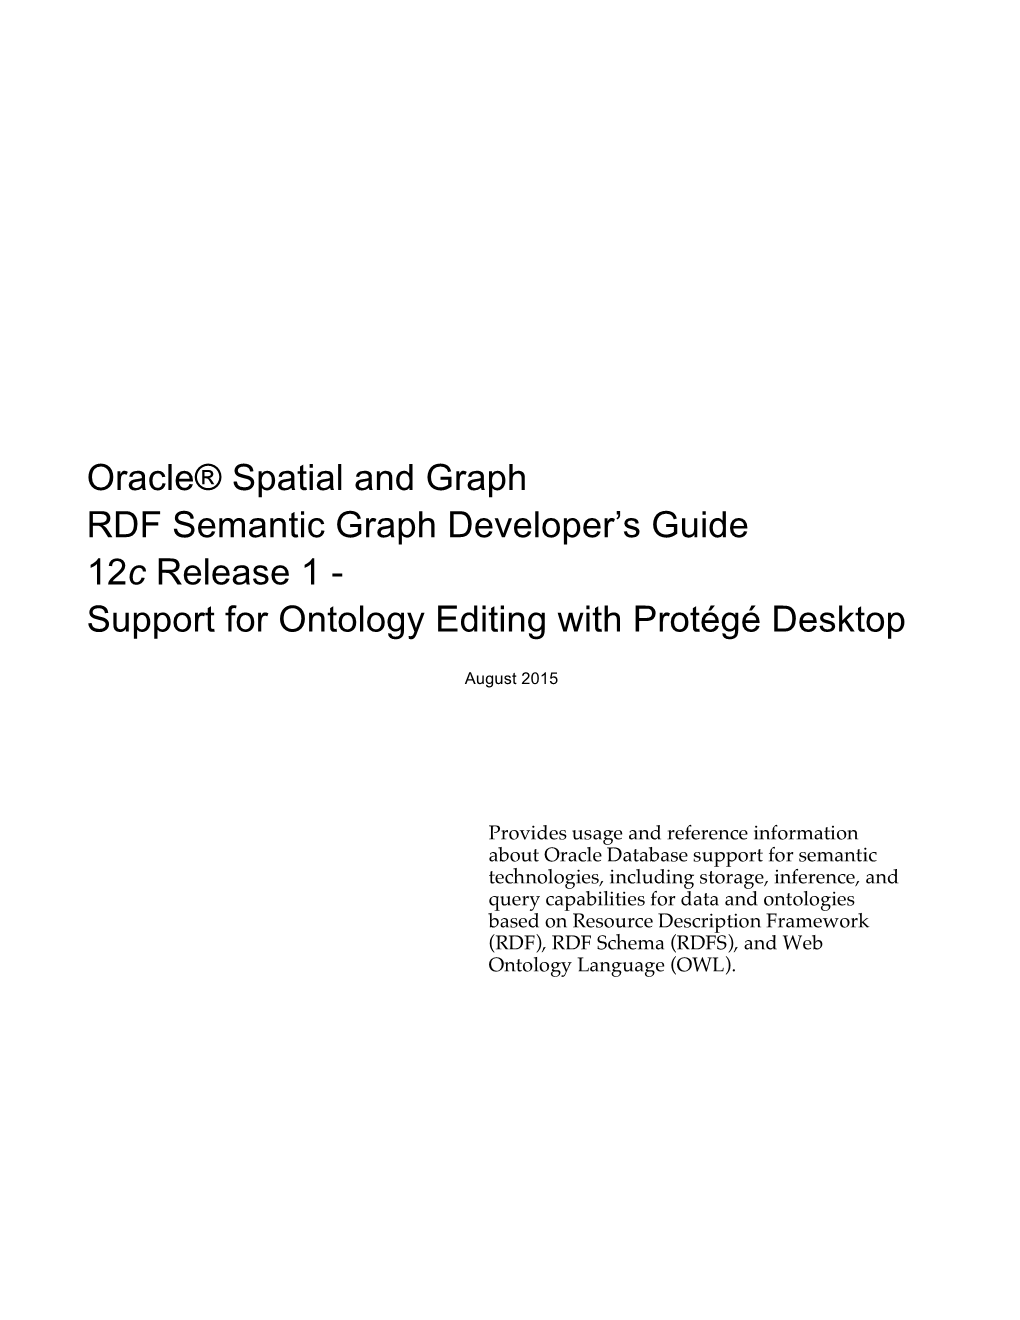 Oracle® Spatial and Graph RDF Semantic Graph Developer's Guide